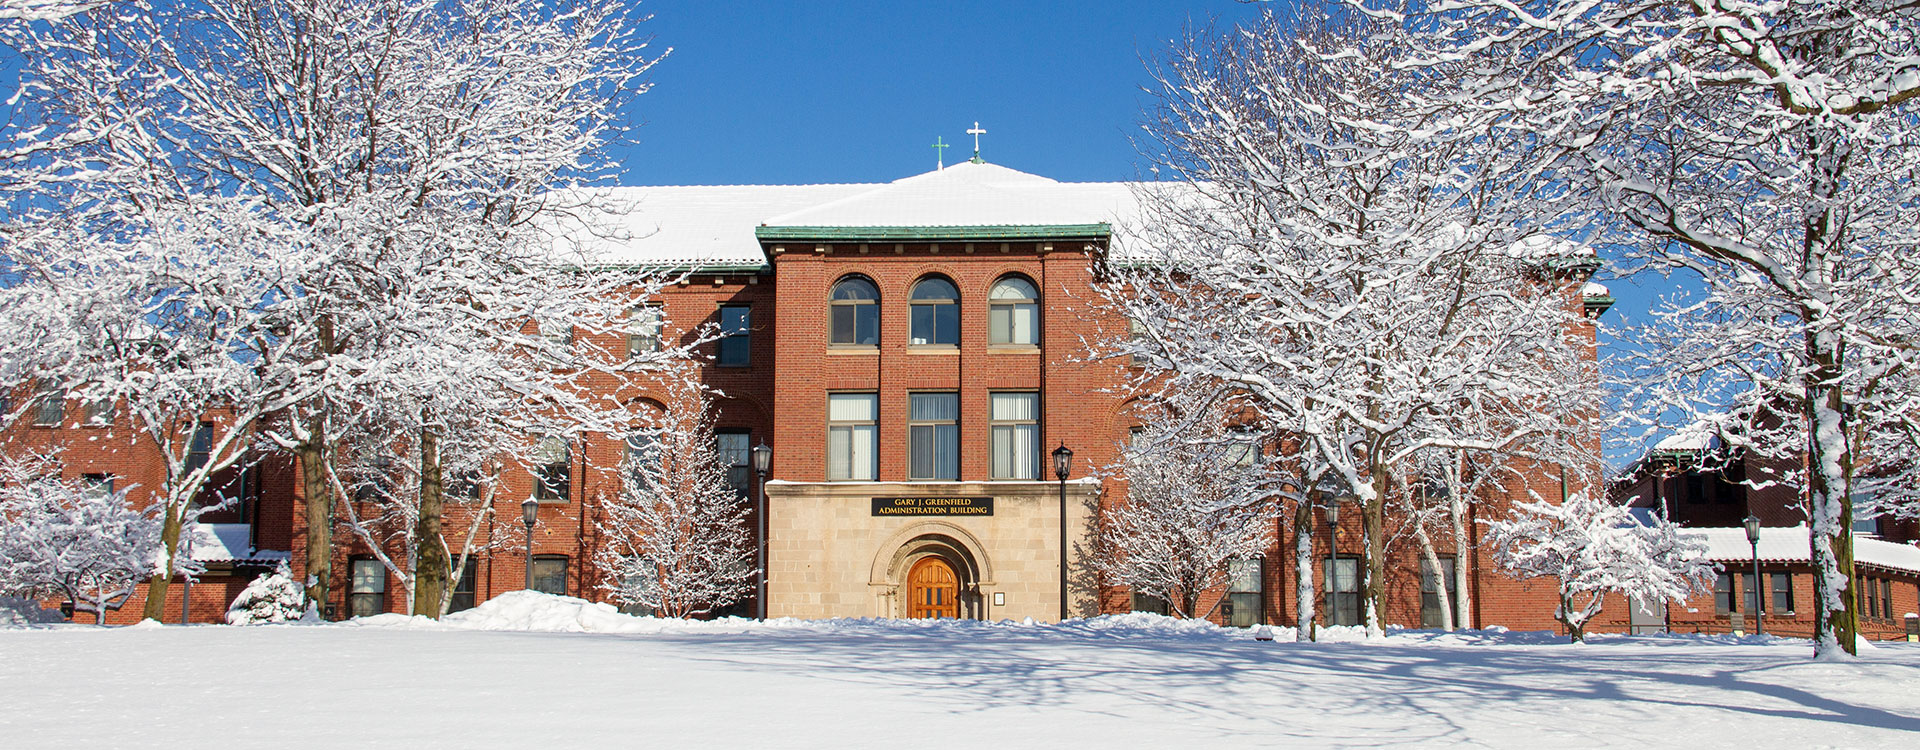 Greenfield Building in winter